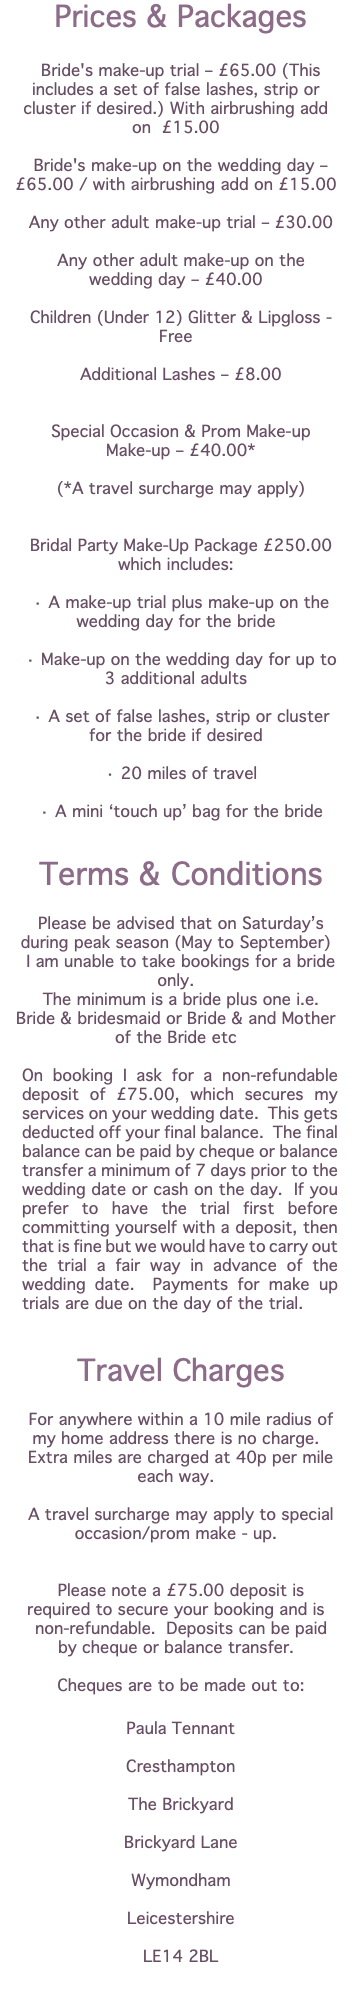 Prices & Packages Bride's make-up trial – £65.00 (This includes a set of false lashes, strip or cluster if desired.) With airbrushing add on £15.00 Bride's make-up on the wedding day – £65.00 / with airbrushing add on £15.00 Any other adult make-up trial – £30.00 Any other adult make-up on the wedding day – £40.00 Children (Under 12) Glitter & Lipgloss - Free Additional Lashes – £8.00 Special Occasion & Prom Make-up Make-up – £40.00* (*A travel surcharge may apply) Bridal Party Make-Up Package £250.00 which includes: · A make-up trial plus make-up on the wedding day for the bride · Make-up on the wedding day for up to 3 additional adults · A set of false lashes, strip or cluster for the bride if desired · 20 miles of travel · A mini ‘touch up’ bag for the bride Terms & Conditions Please be advised that on Saturday’s during peak season (May to September) I am unable to take bookings for a bride only. The minimum is a bride plus one i.e. Bride & bridesmaid or Bride & and Mother of the Bride etc On booking I ask for a non-refundable deposit of £75.00, which secures my services on your wedding date. This gets deducted off your final balance. The final balance can be paid by cheque or balance transfer a minimum of 7 days prior to the wedding date or cash on the day. If you prefer to have the trial first before committing yourself with a deposit, then that is fine but we would have to carry out the trial a fair way in advance of the wedding date. Payments for make up trials are due on the day of the trial. Travel Charges For anywhere within a 10 mile radius of my home address there is no charge. Extra miles are charged at 40p per mile each way. A travel surcharge may apply to special occasion/prom make - up. Please note a £75.00 deposit is required to secure your booking and is non-refundable. Deposits can be paid by cheque or balance transfer. Cheques are to be made out to: Paula Tennant Cresthampton The Brickyard Brickyard Lane Wymondham Leicestershire LE14 2BL 